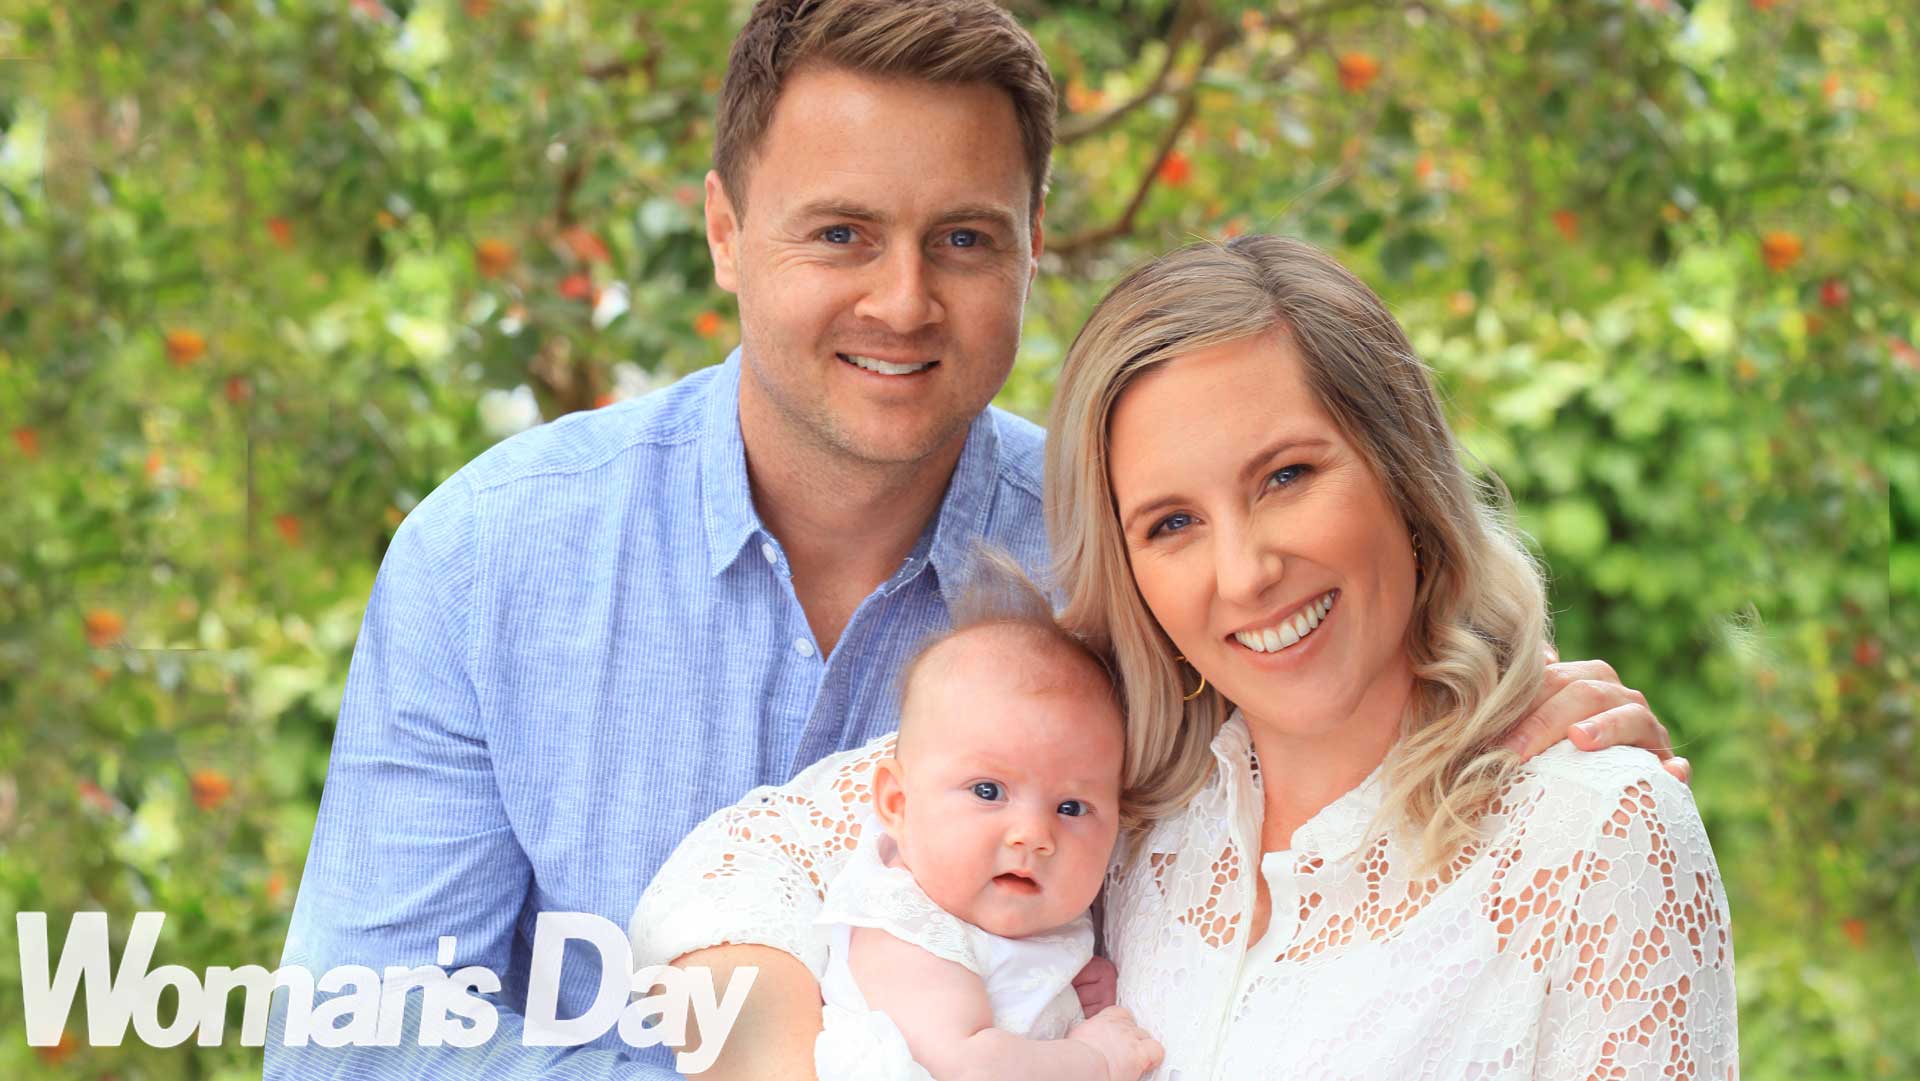 It’s a wedding and a baby for former Bachelorette Kate Cameron